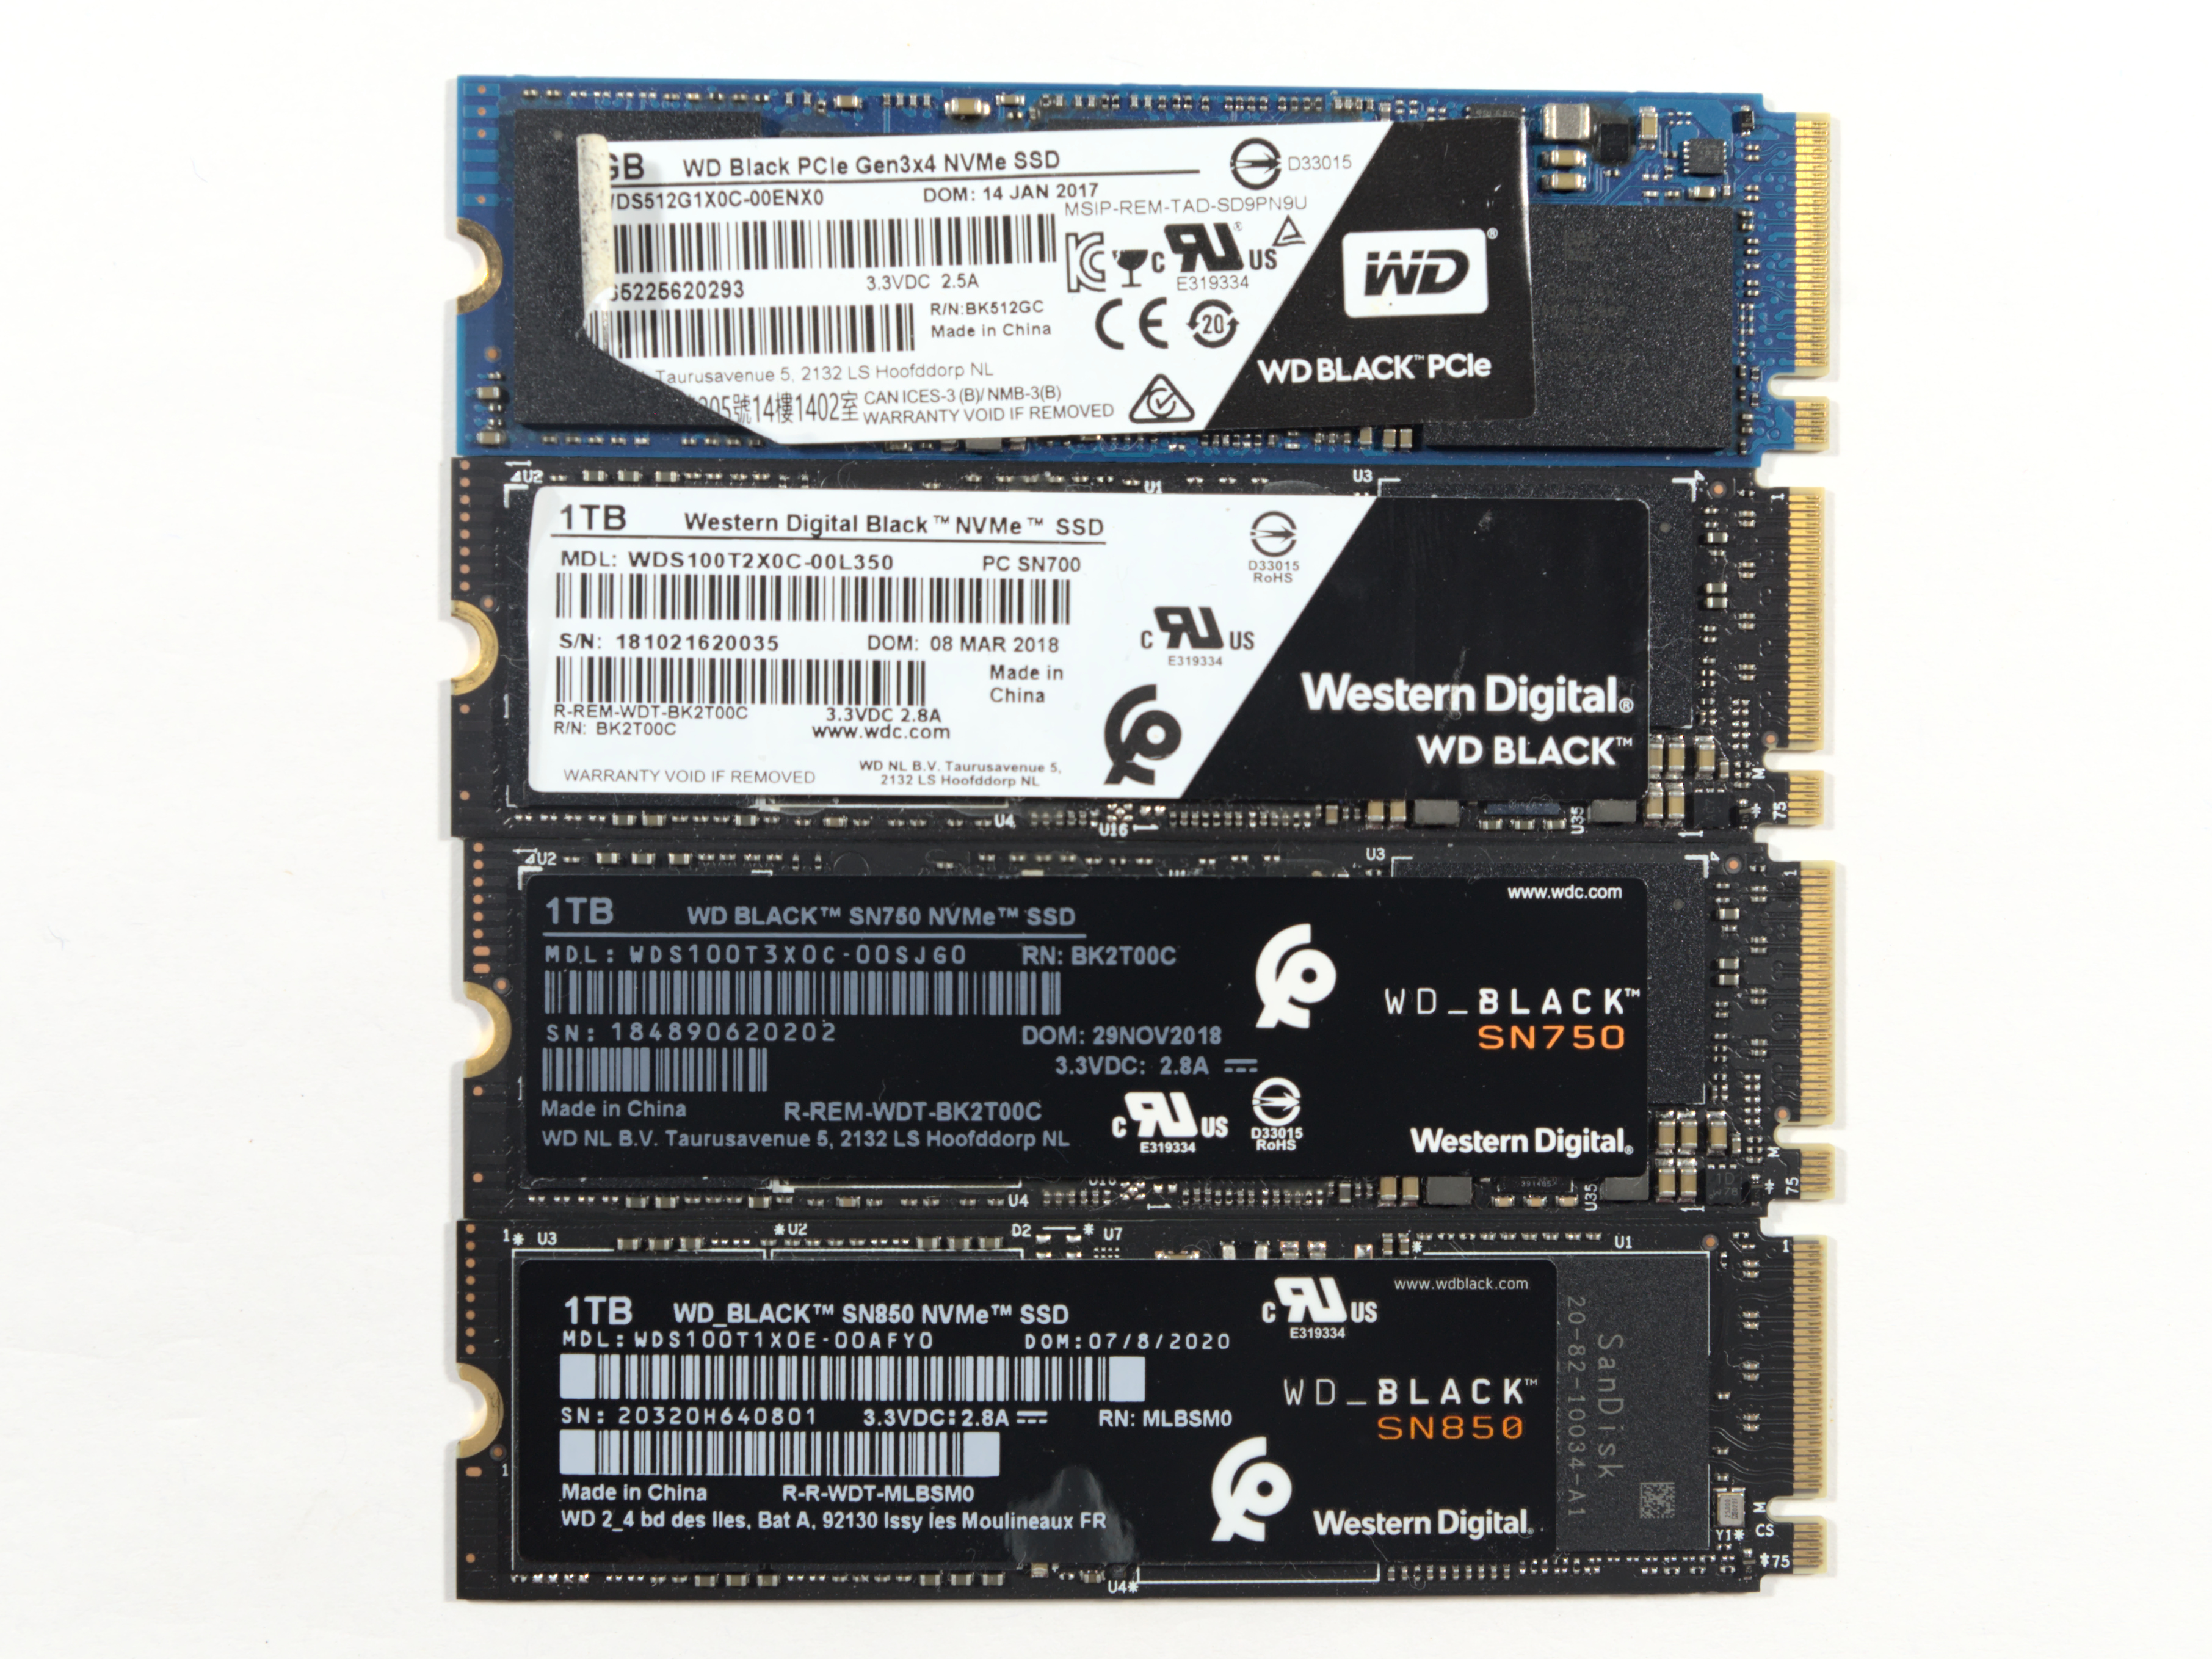 The Western Digital Wd Black Sn850 Review A Very Fast Pcie 4 0 Ssd